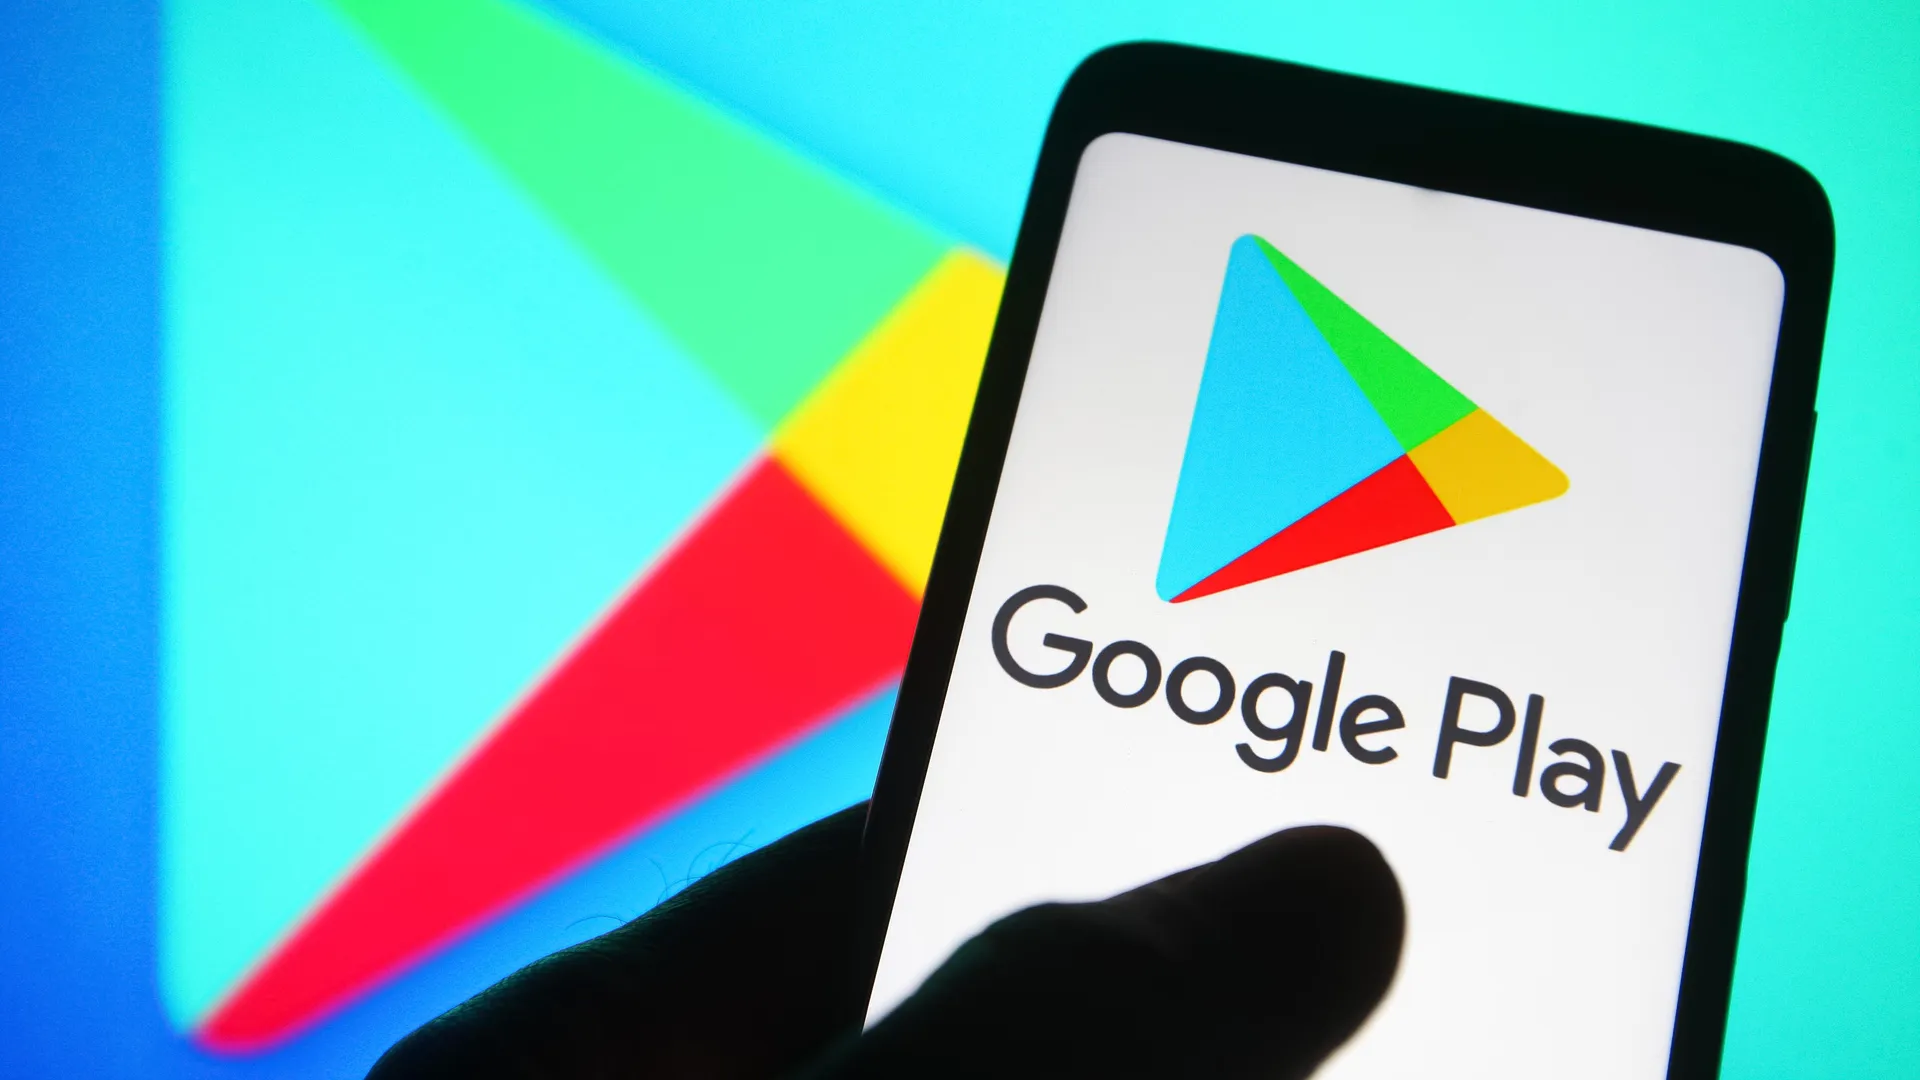 Google to Pay $700M in Play Store Dispute Settlement | Robots.net